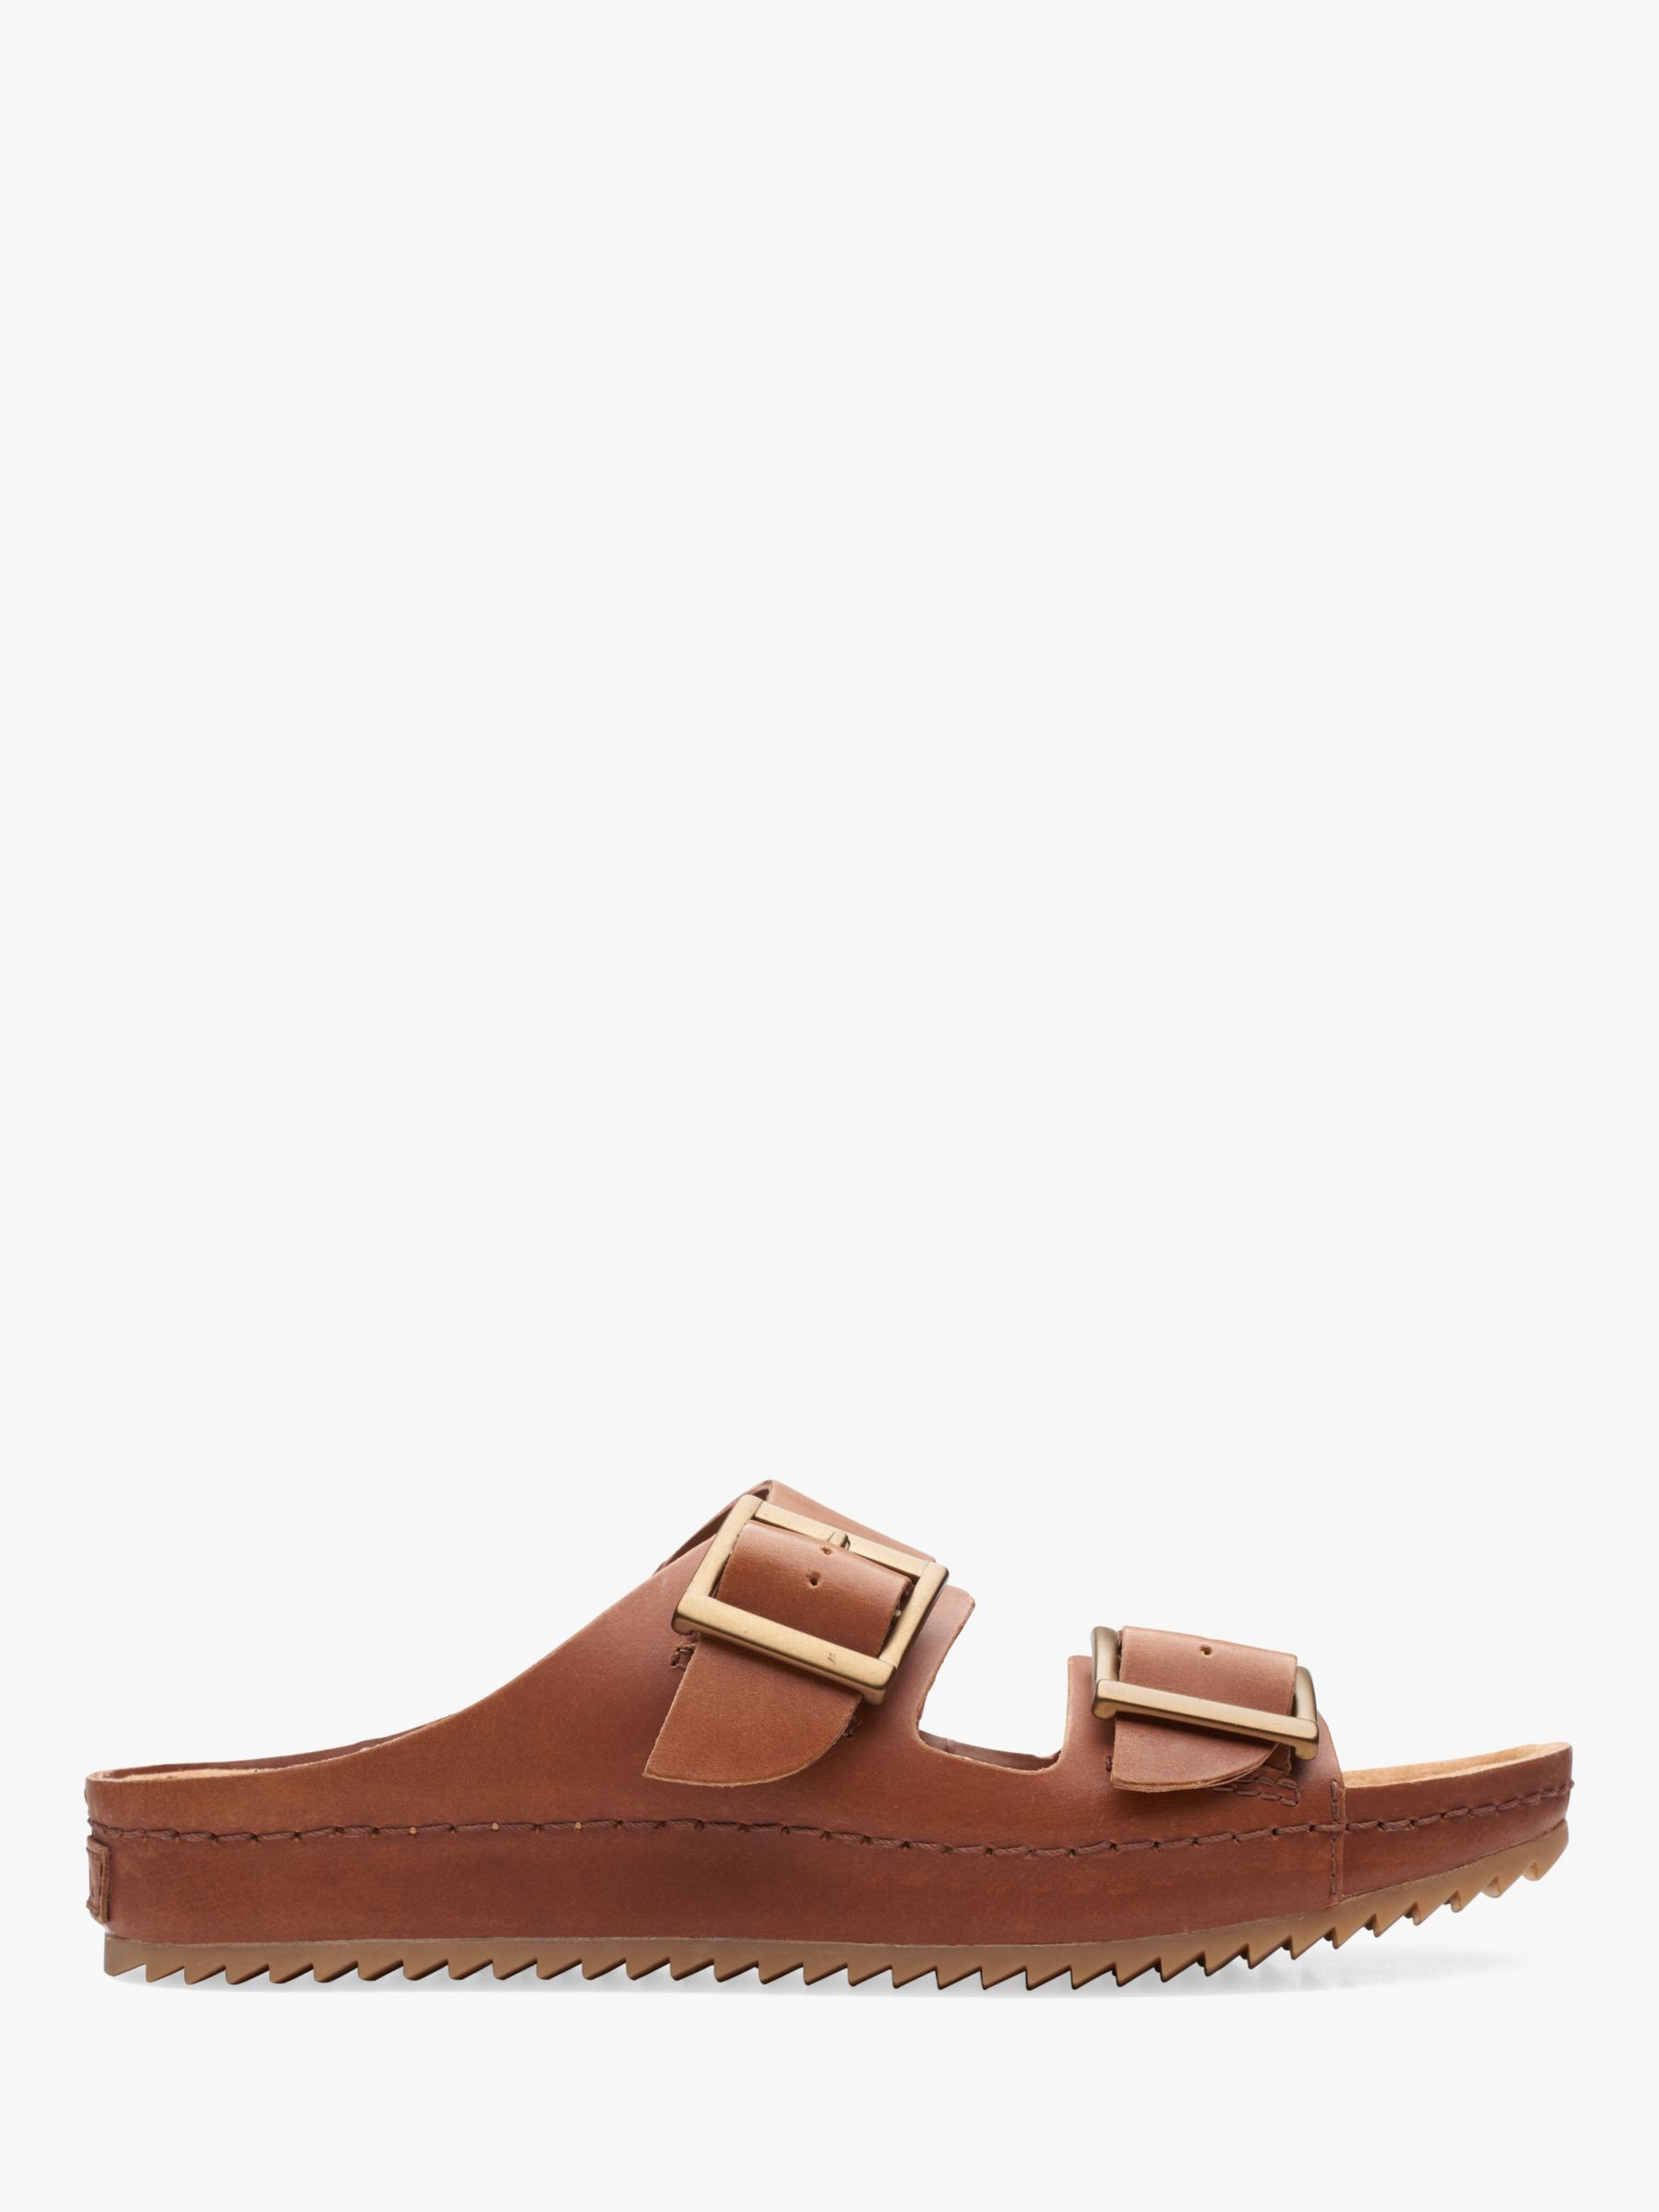 Clarks Brookleigh Sun Leather Footbed Sandals, Dark Tan at John Lewis ...